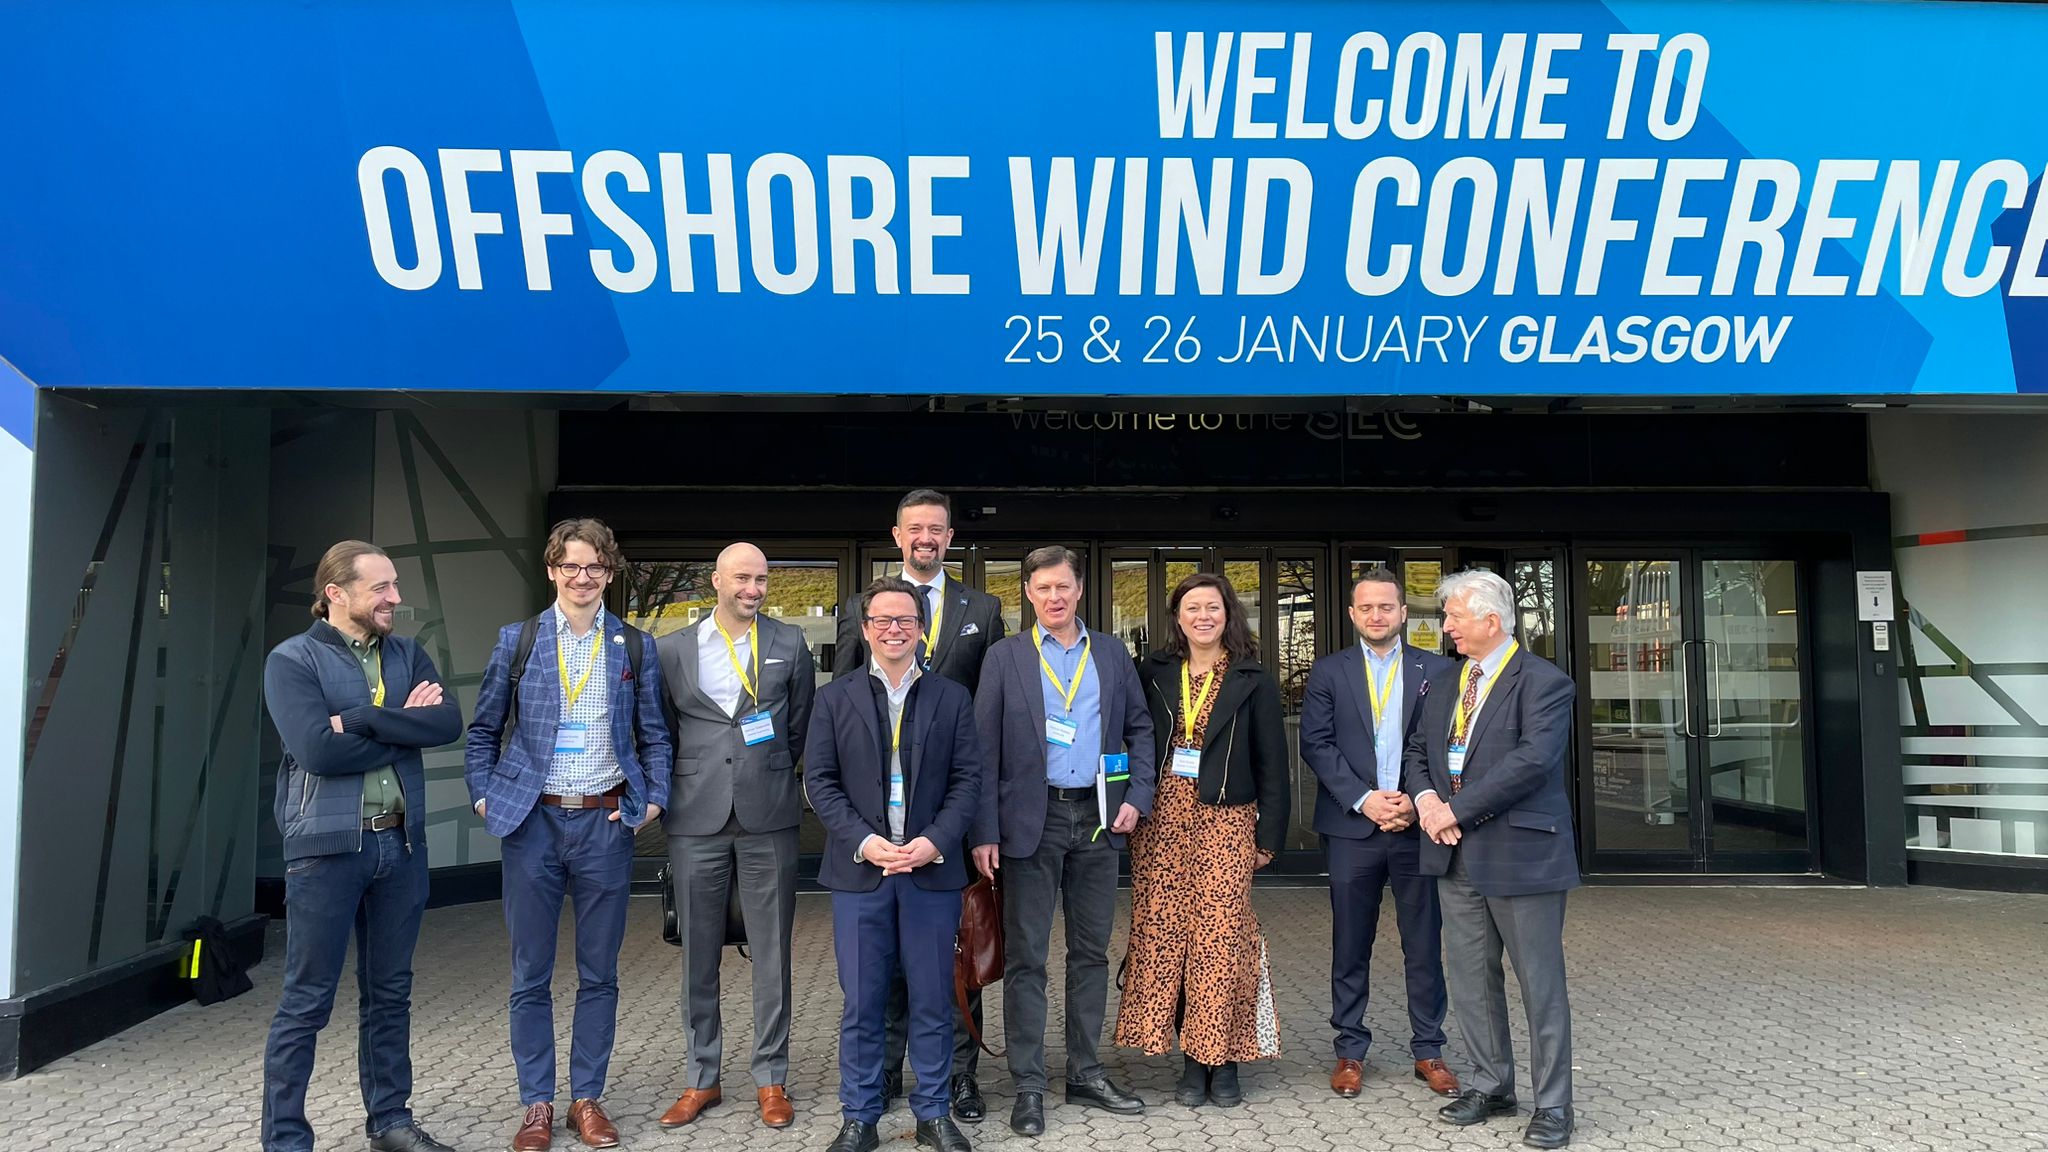 OFSHORE WIND CONFERENCE